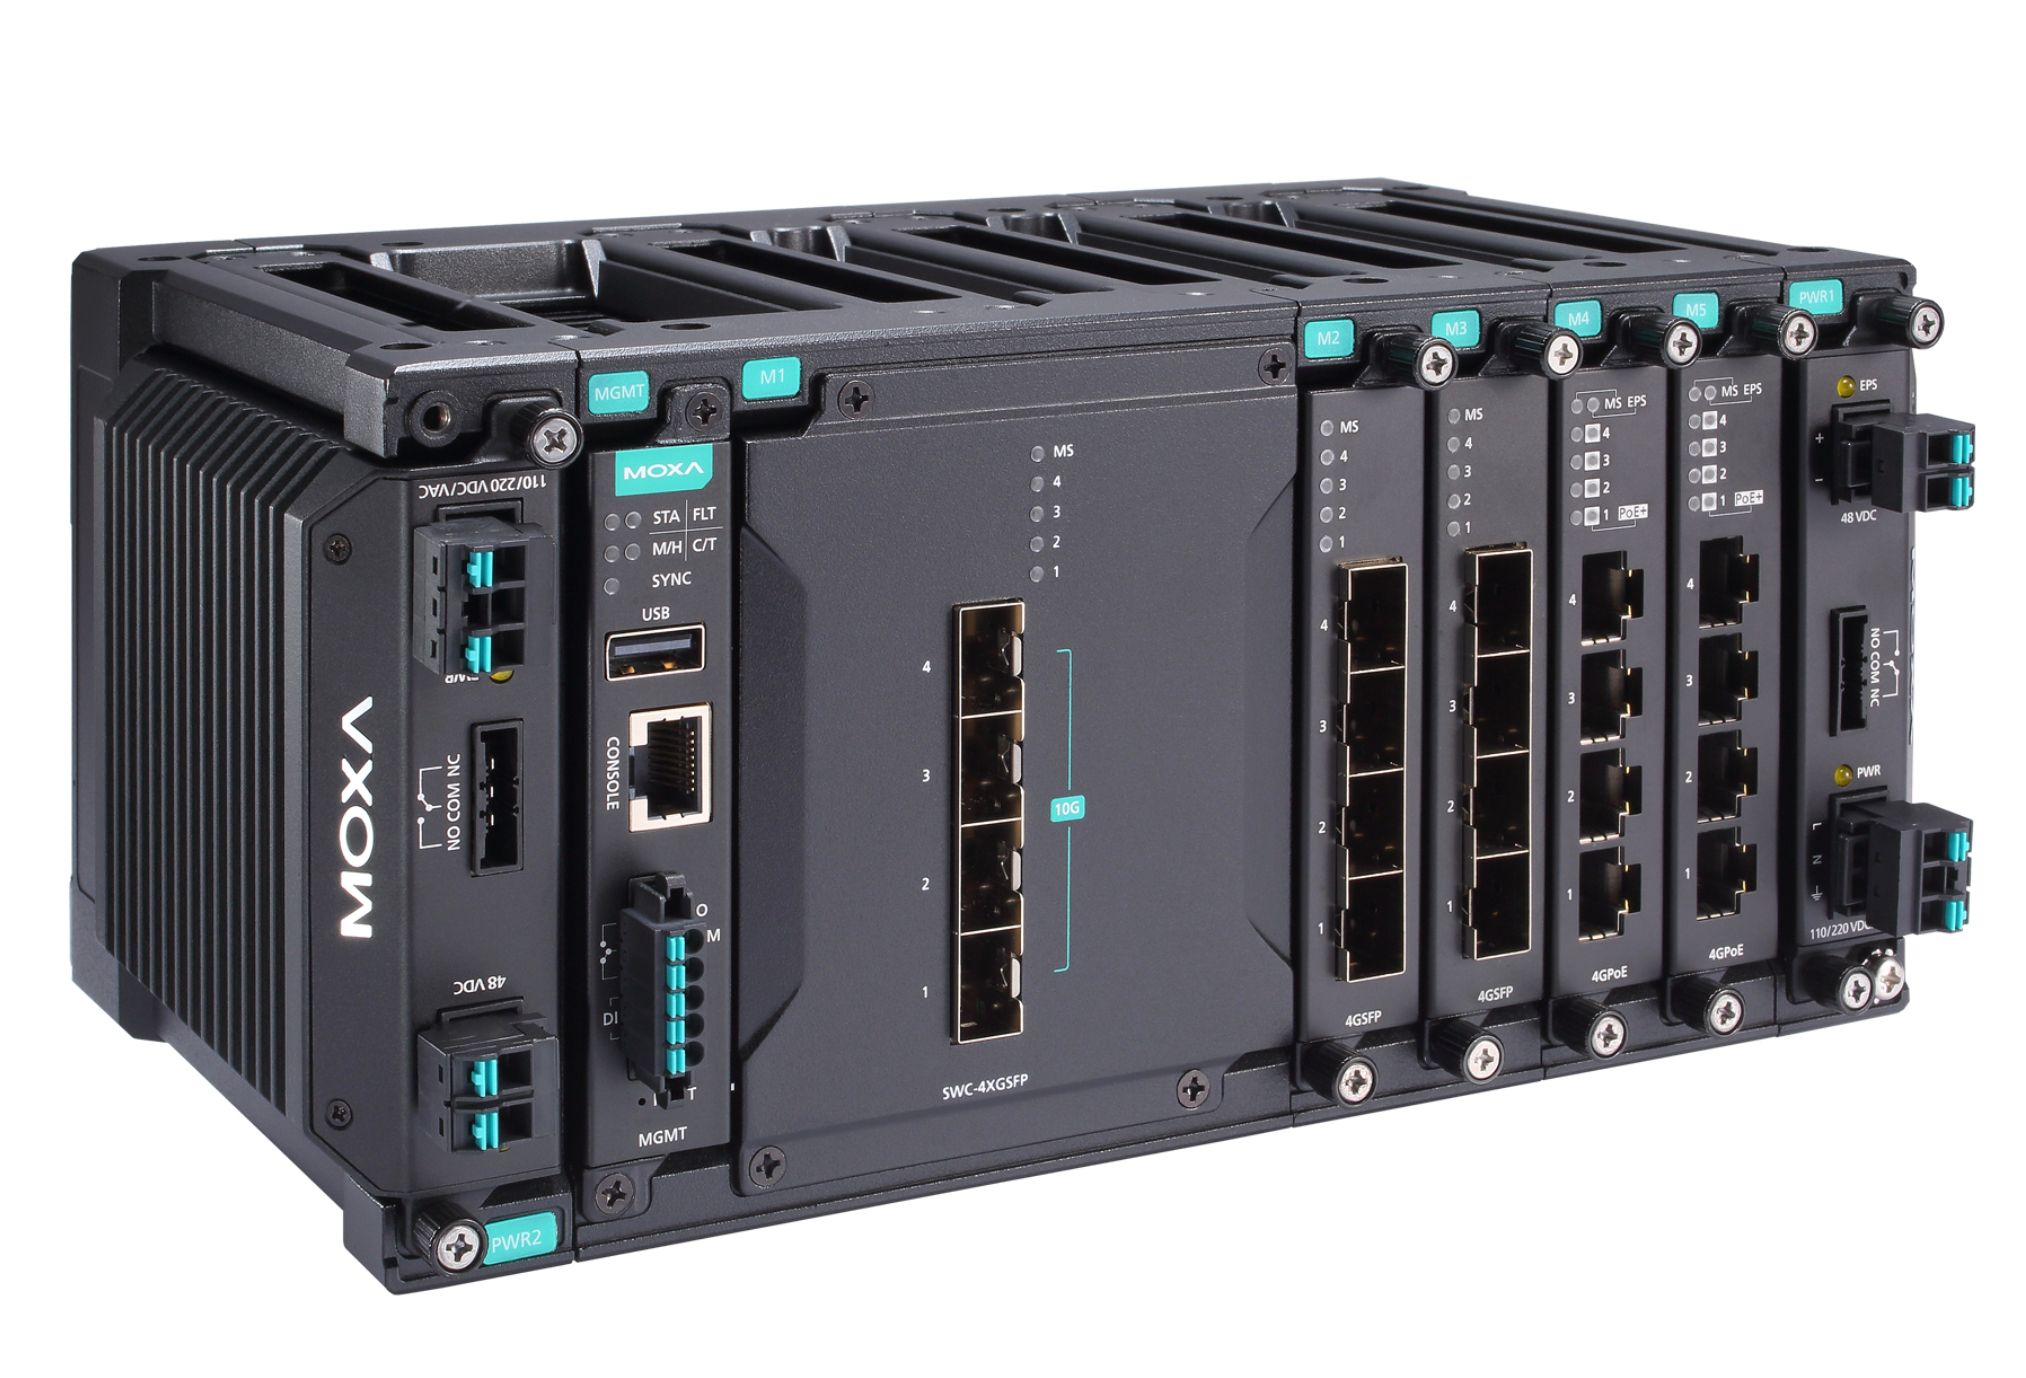 Moxa Targets Large-scale Industrial Network Deployments with Modular Layer 3 Managed Switches